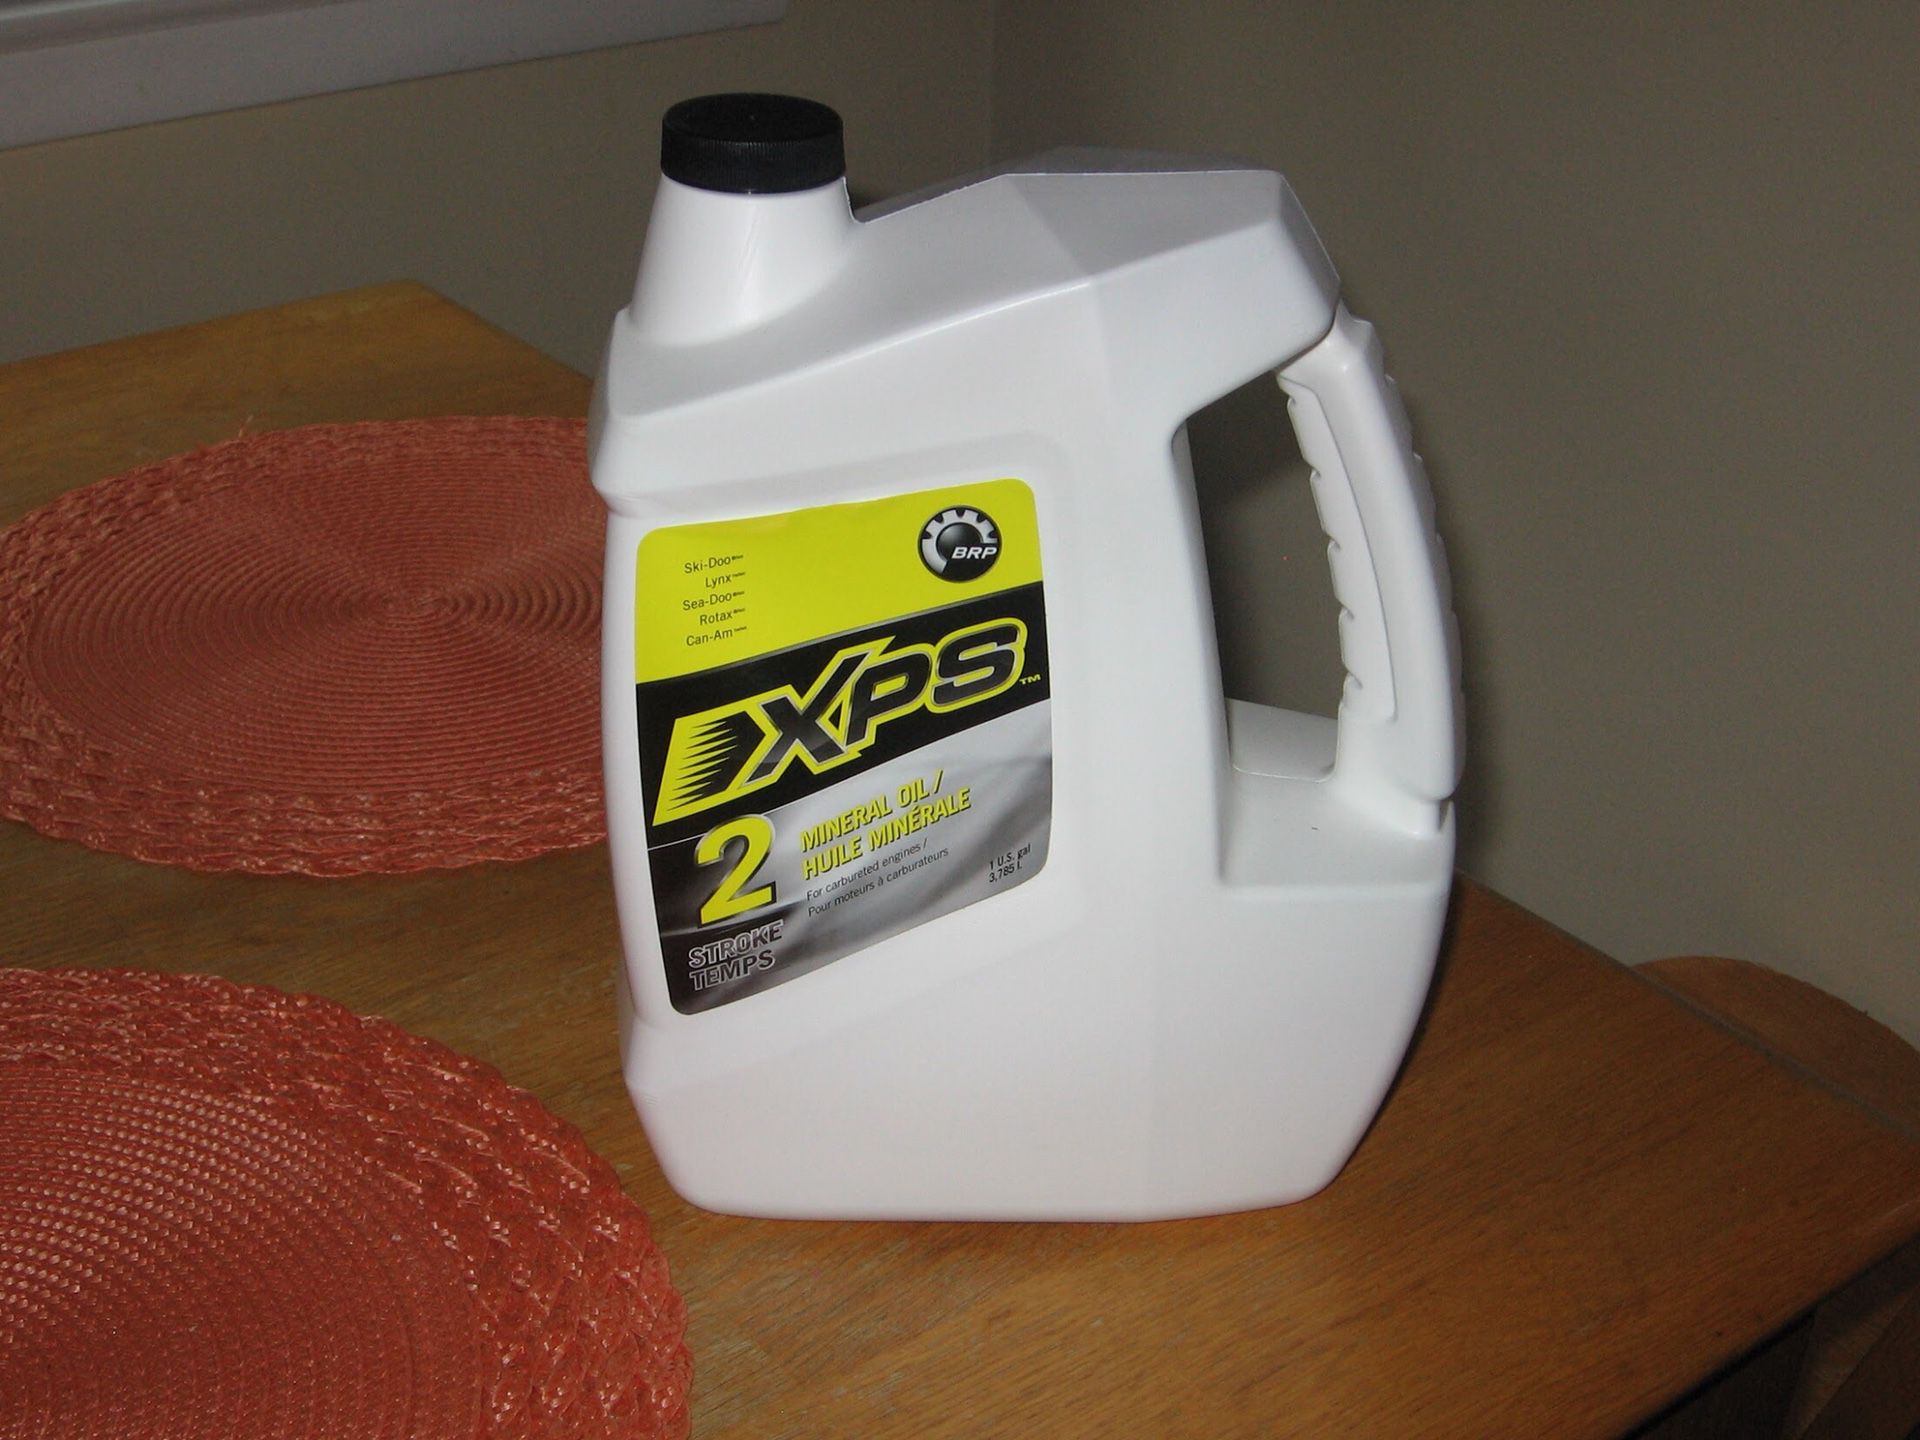 Brand new sealed gallon of SeaDoo XP-S XPS 2-stroke mineral oil for Sea-Doo XP / GS / GSI / GT / GTI / GTS / GSX / GTX / RX / SP / SPI / SPX / XP .